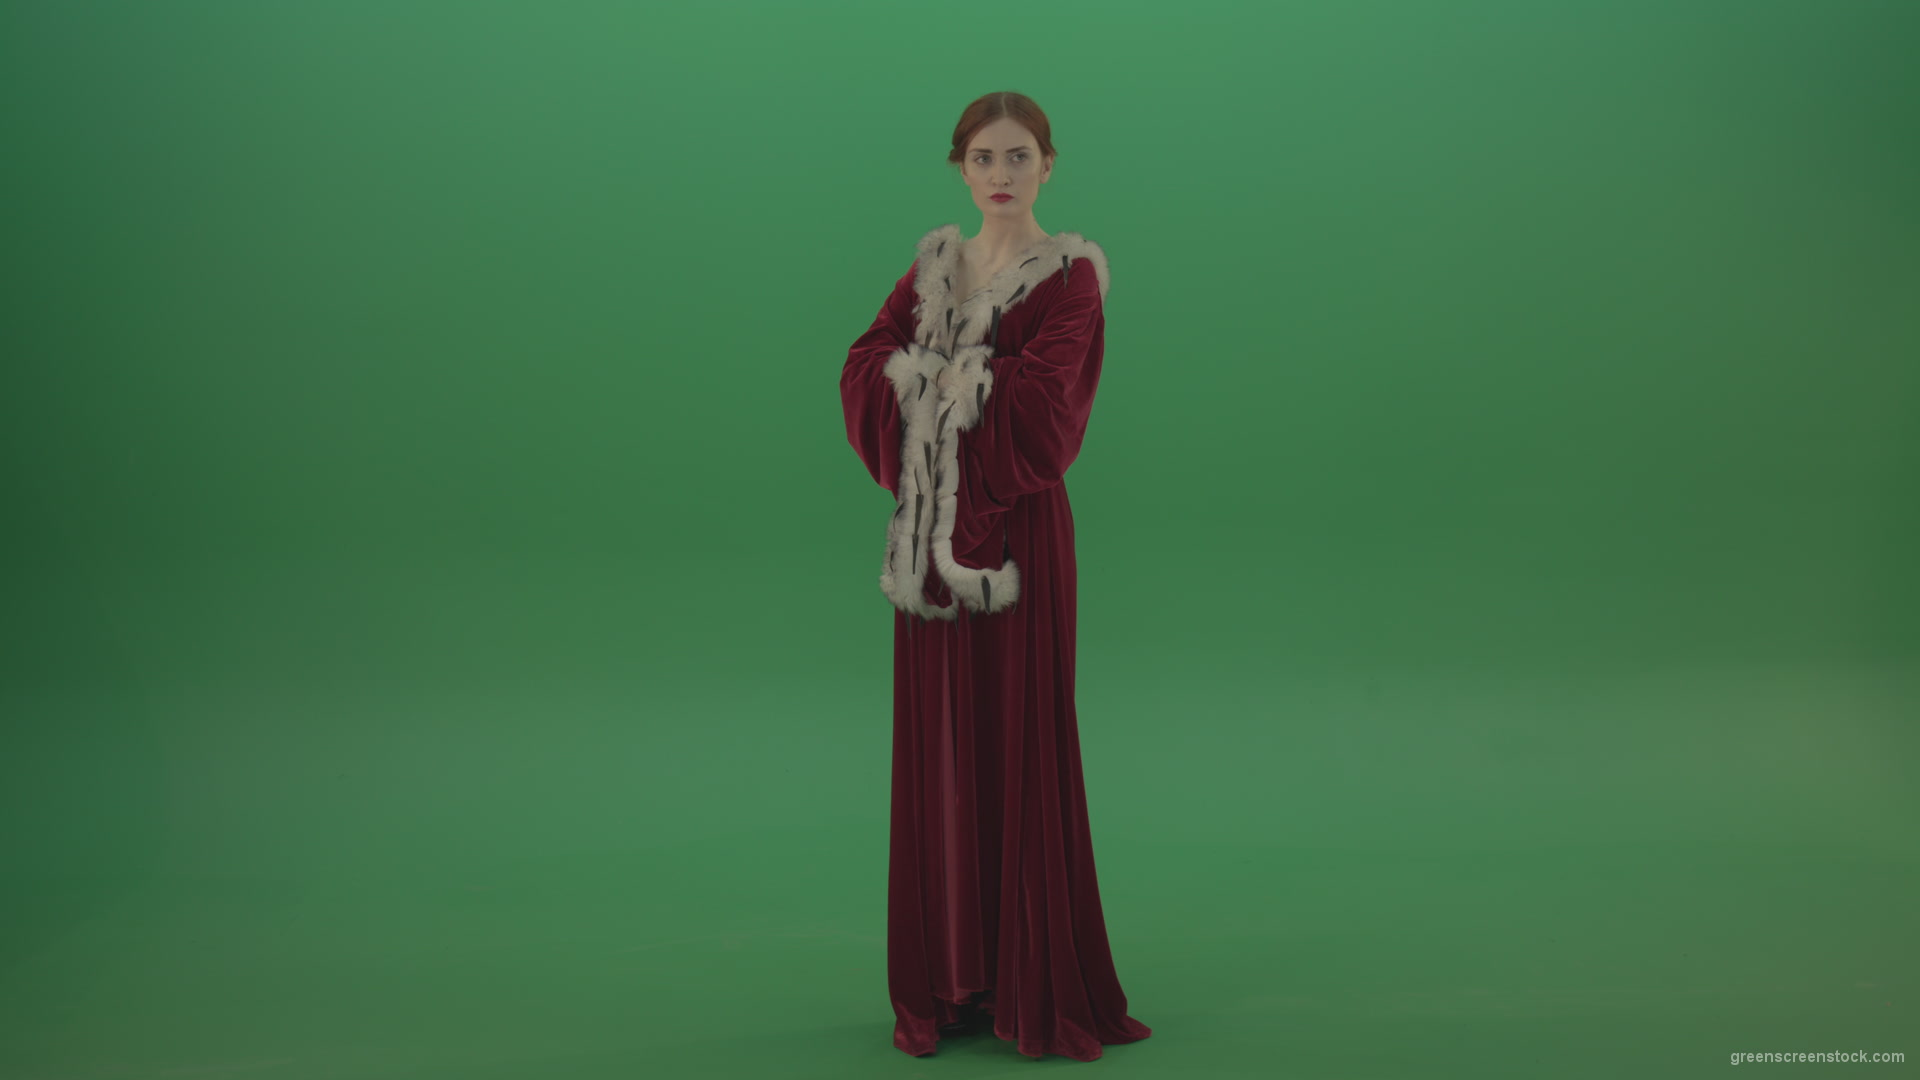 Young-actress-dressed-in-royal-dress-showing-different-scenes_009 Green Screen Stock